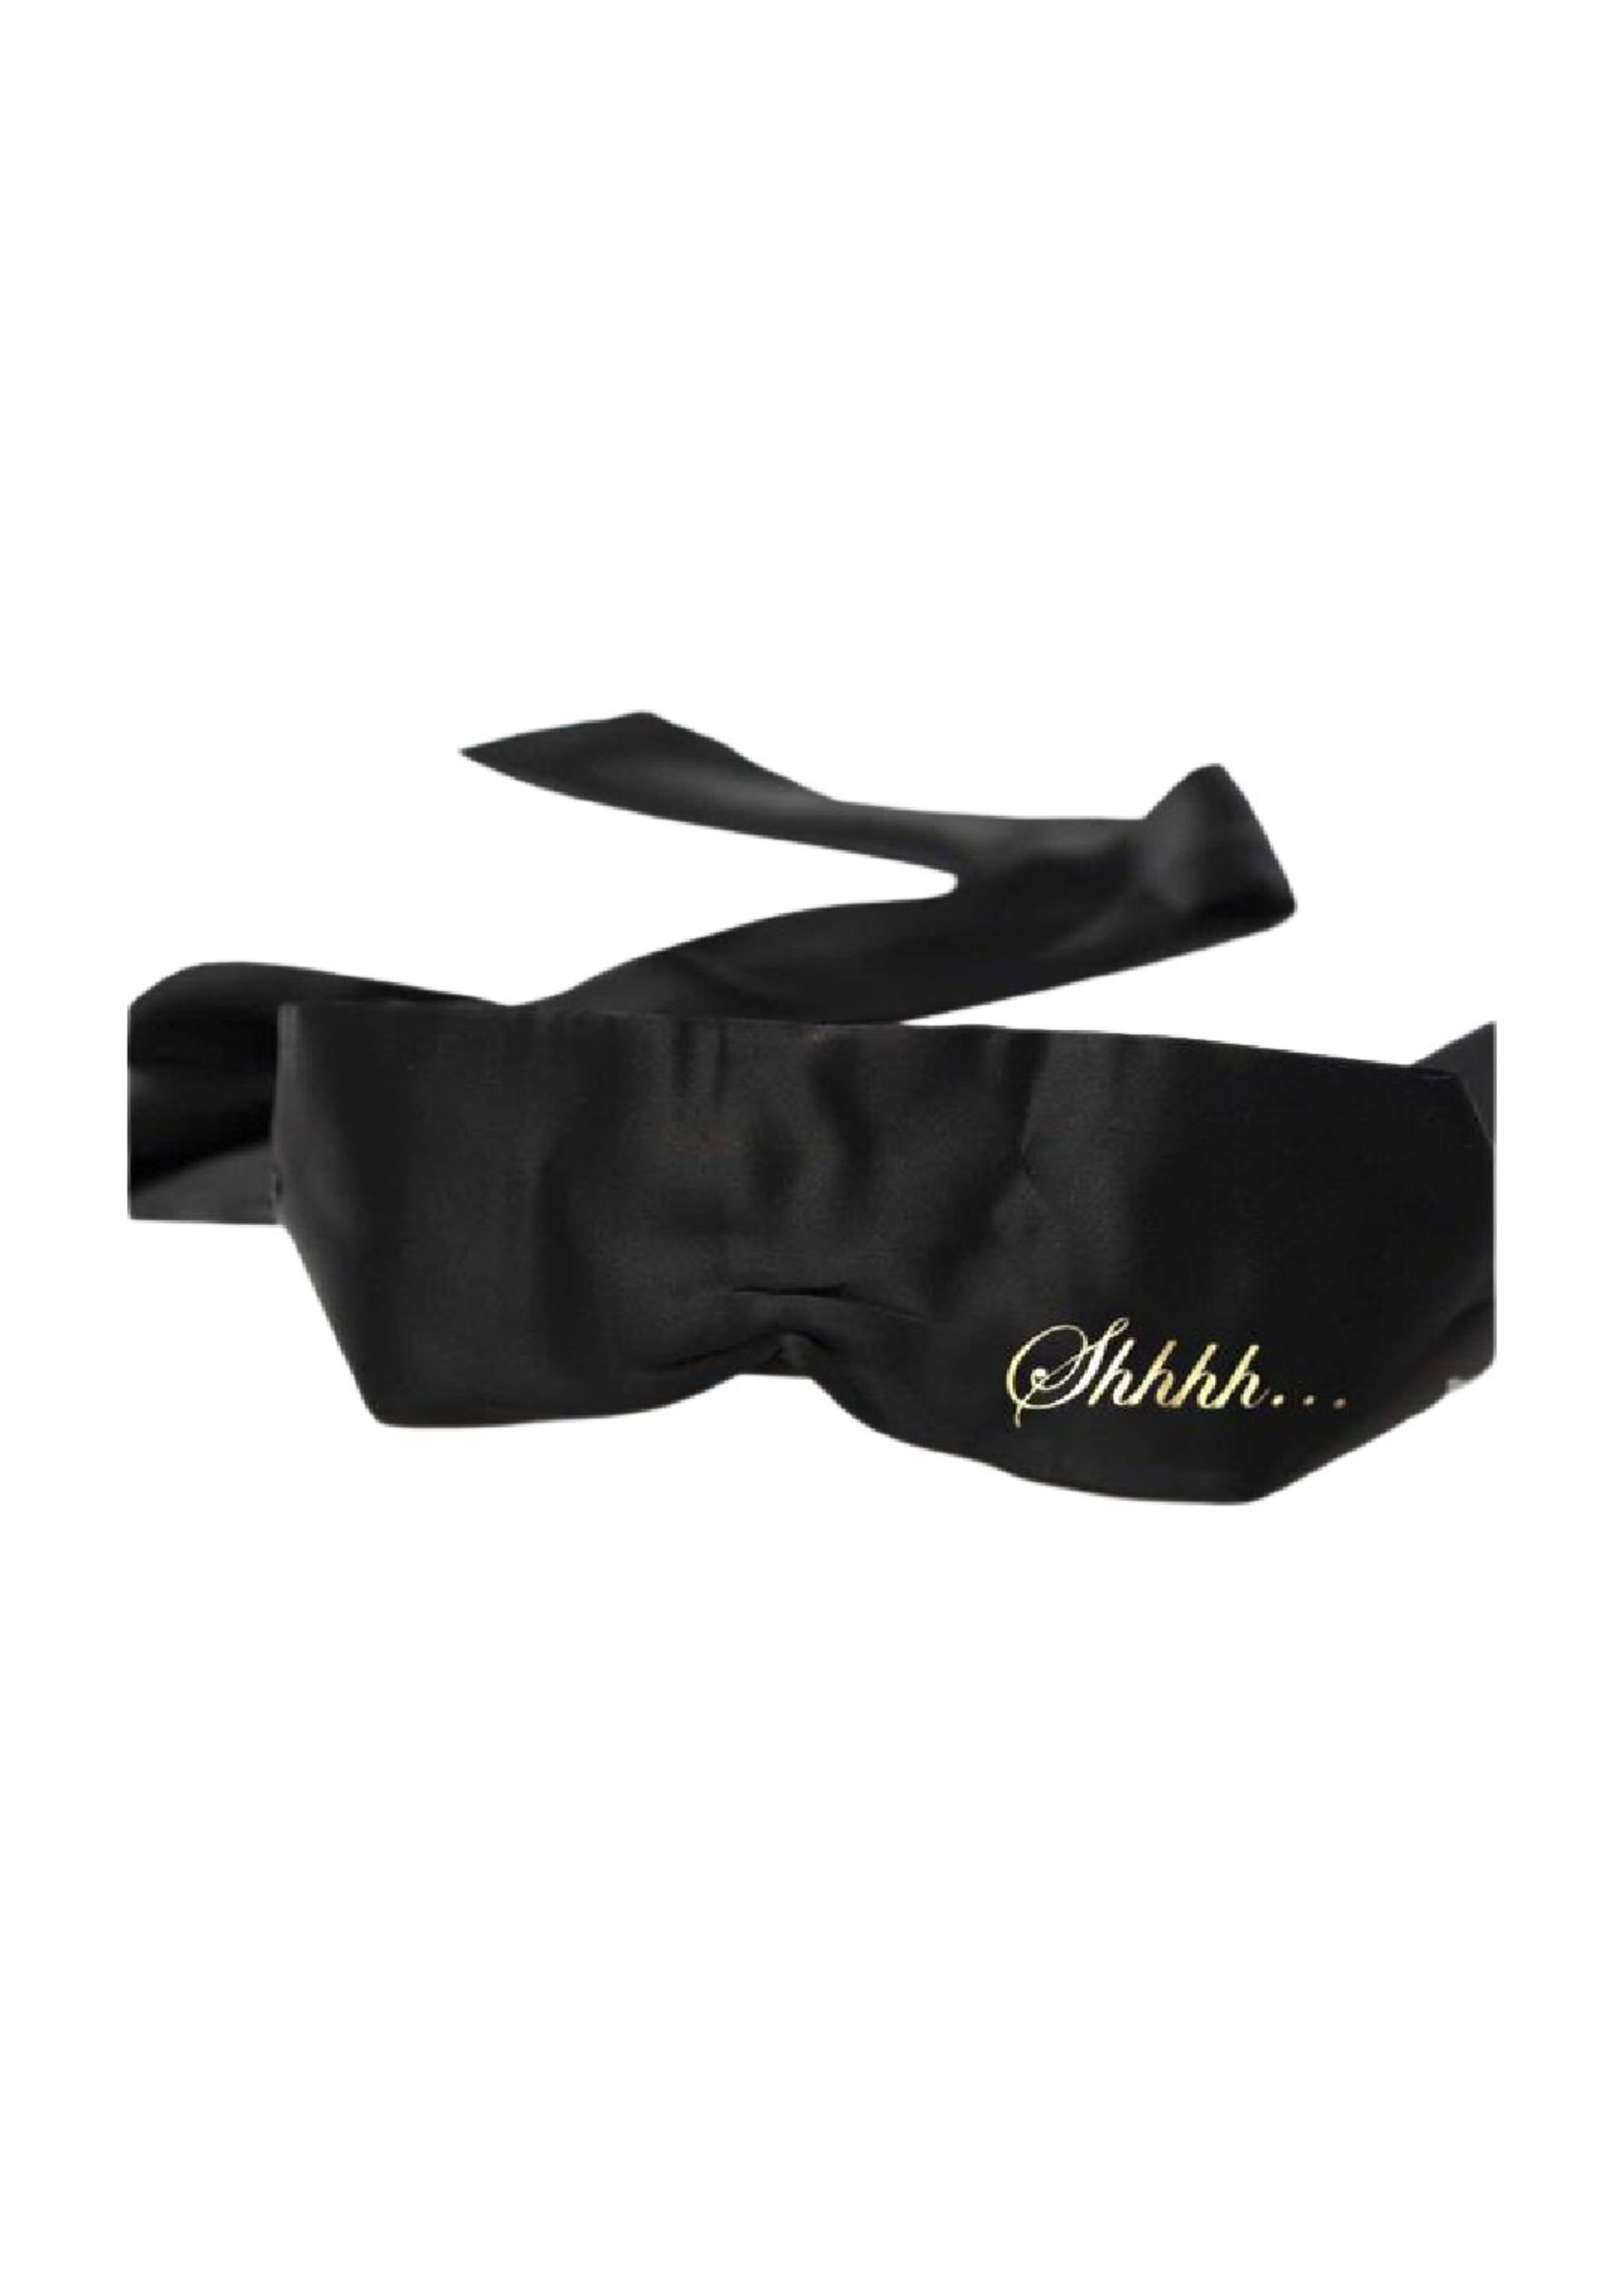 Bijoux Indiscrets Shhh Silky Blindfold